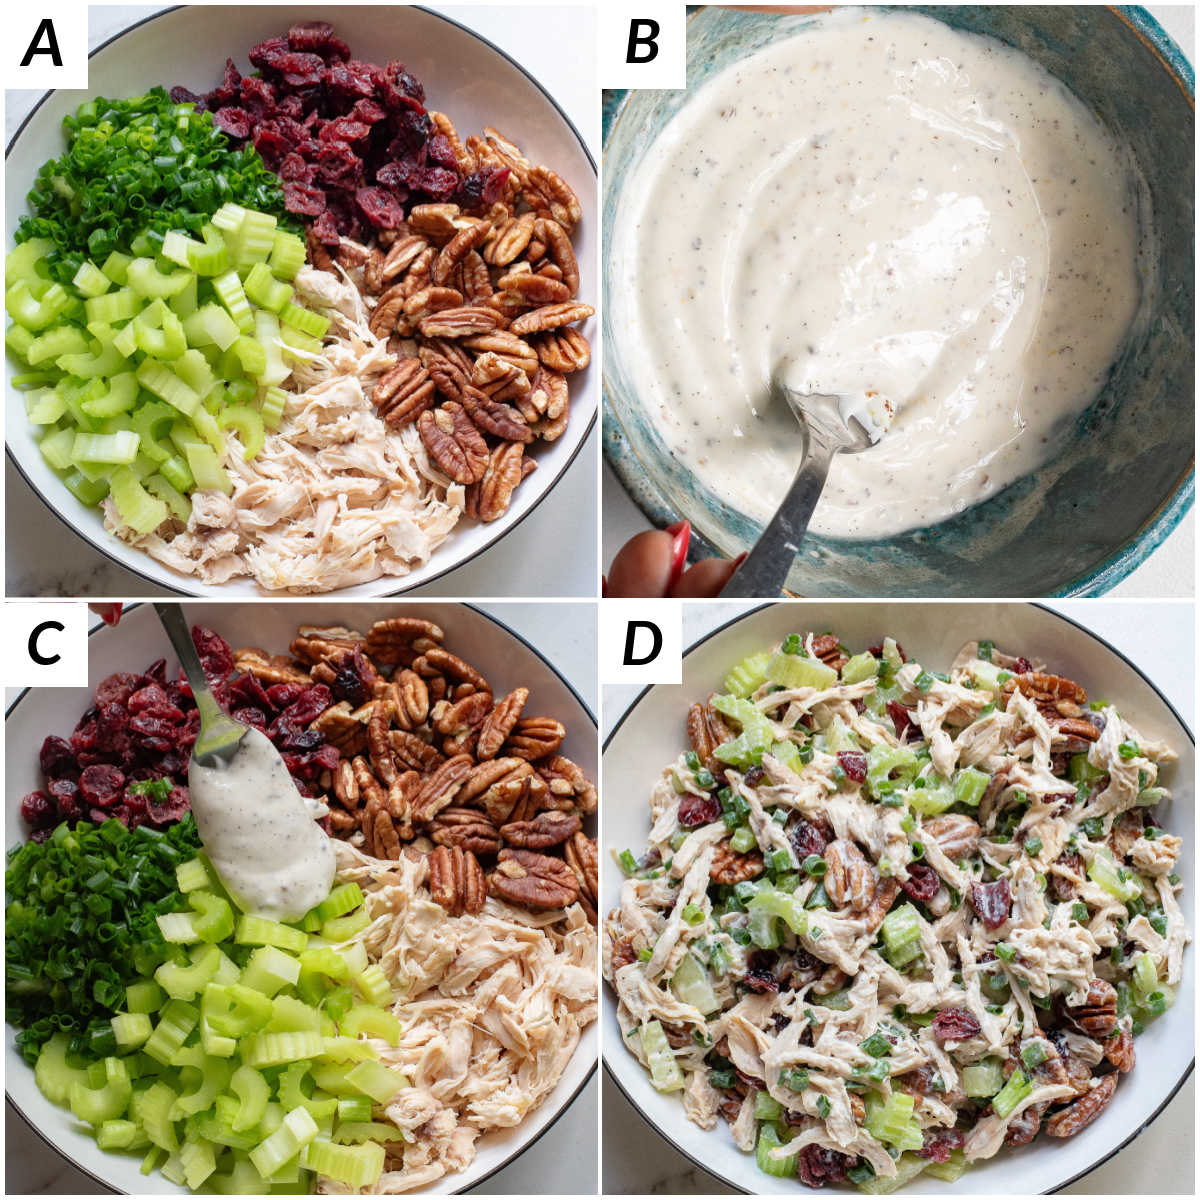 image collage showing the steps for making cranberry chicken salad